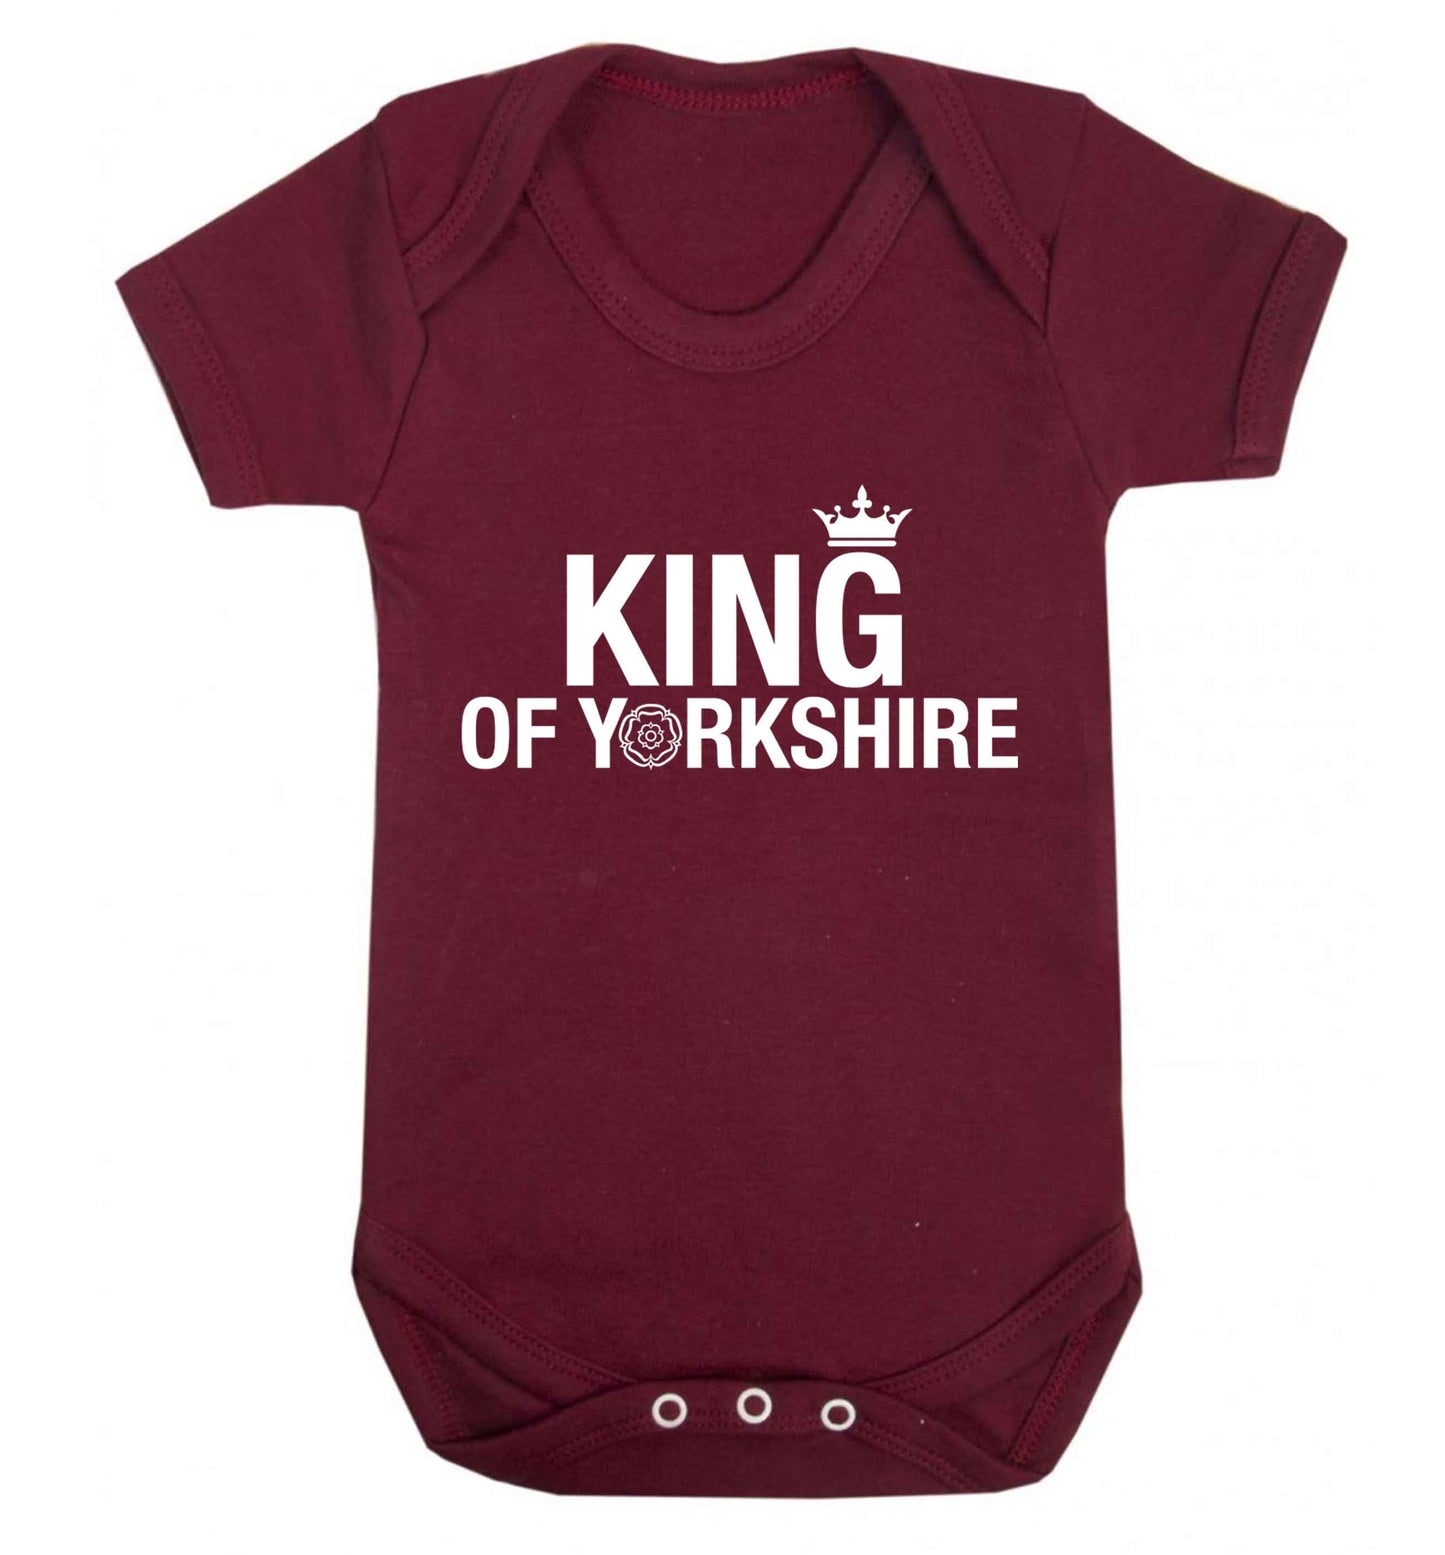 King of Yorkshire Baby Vest maroon 18-24 months